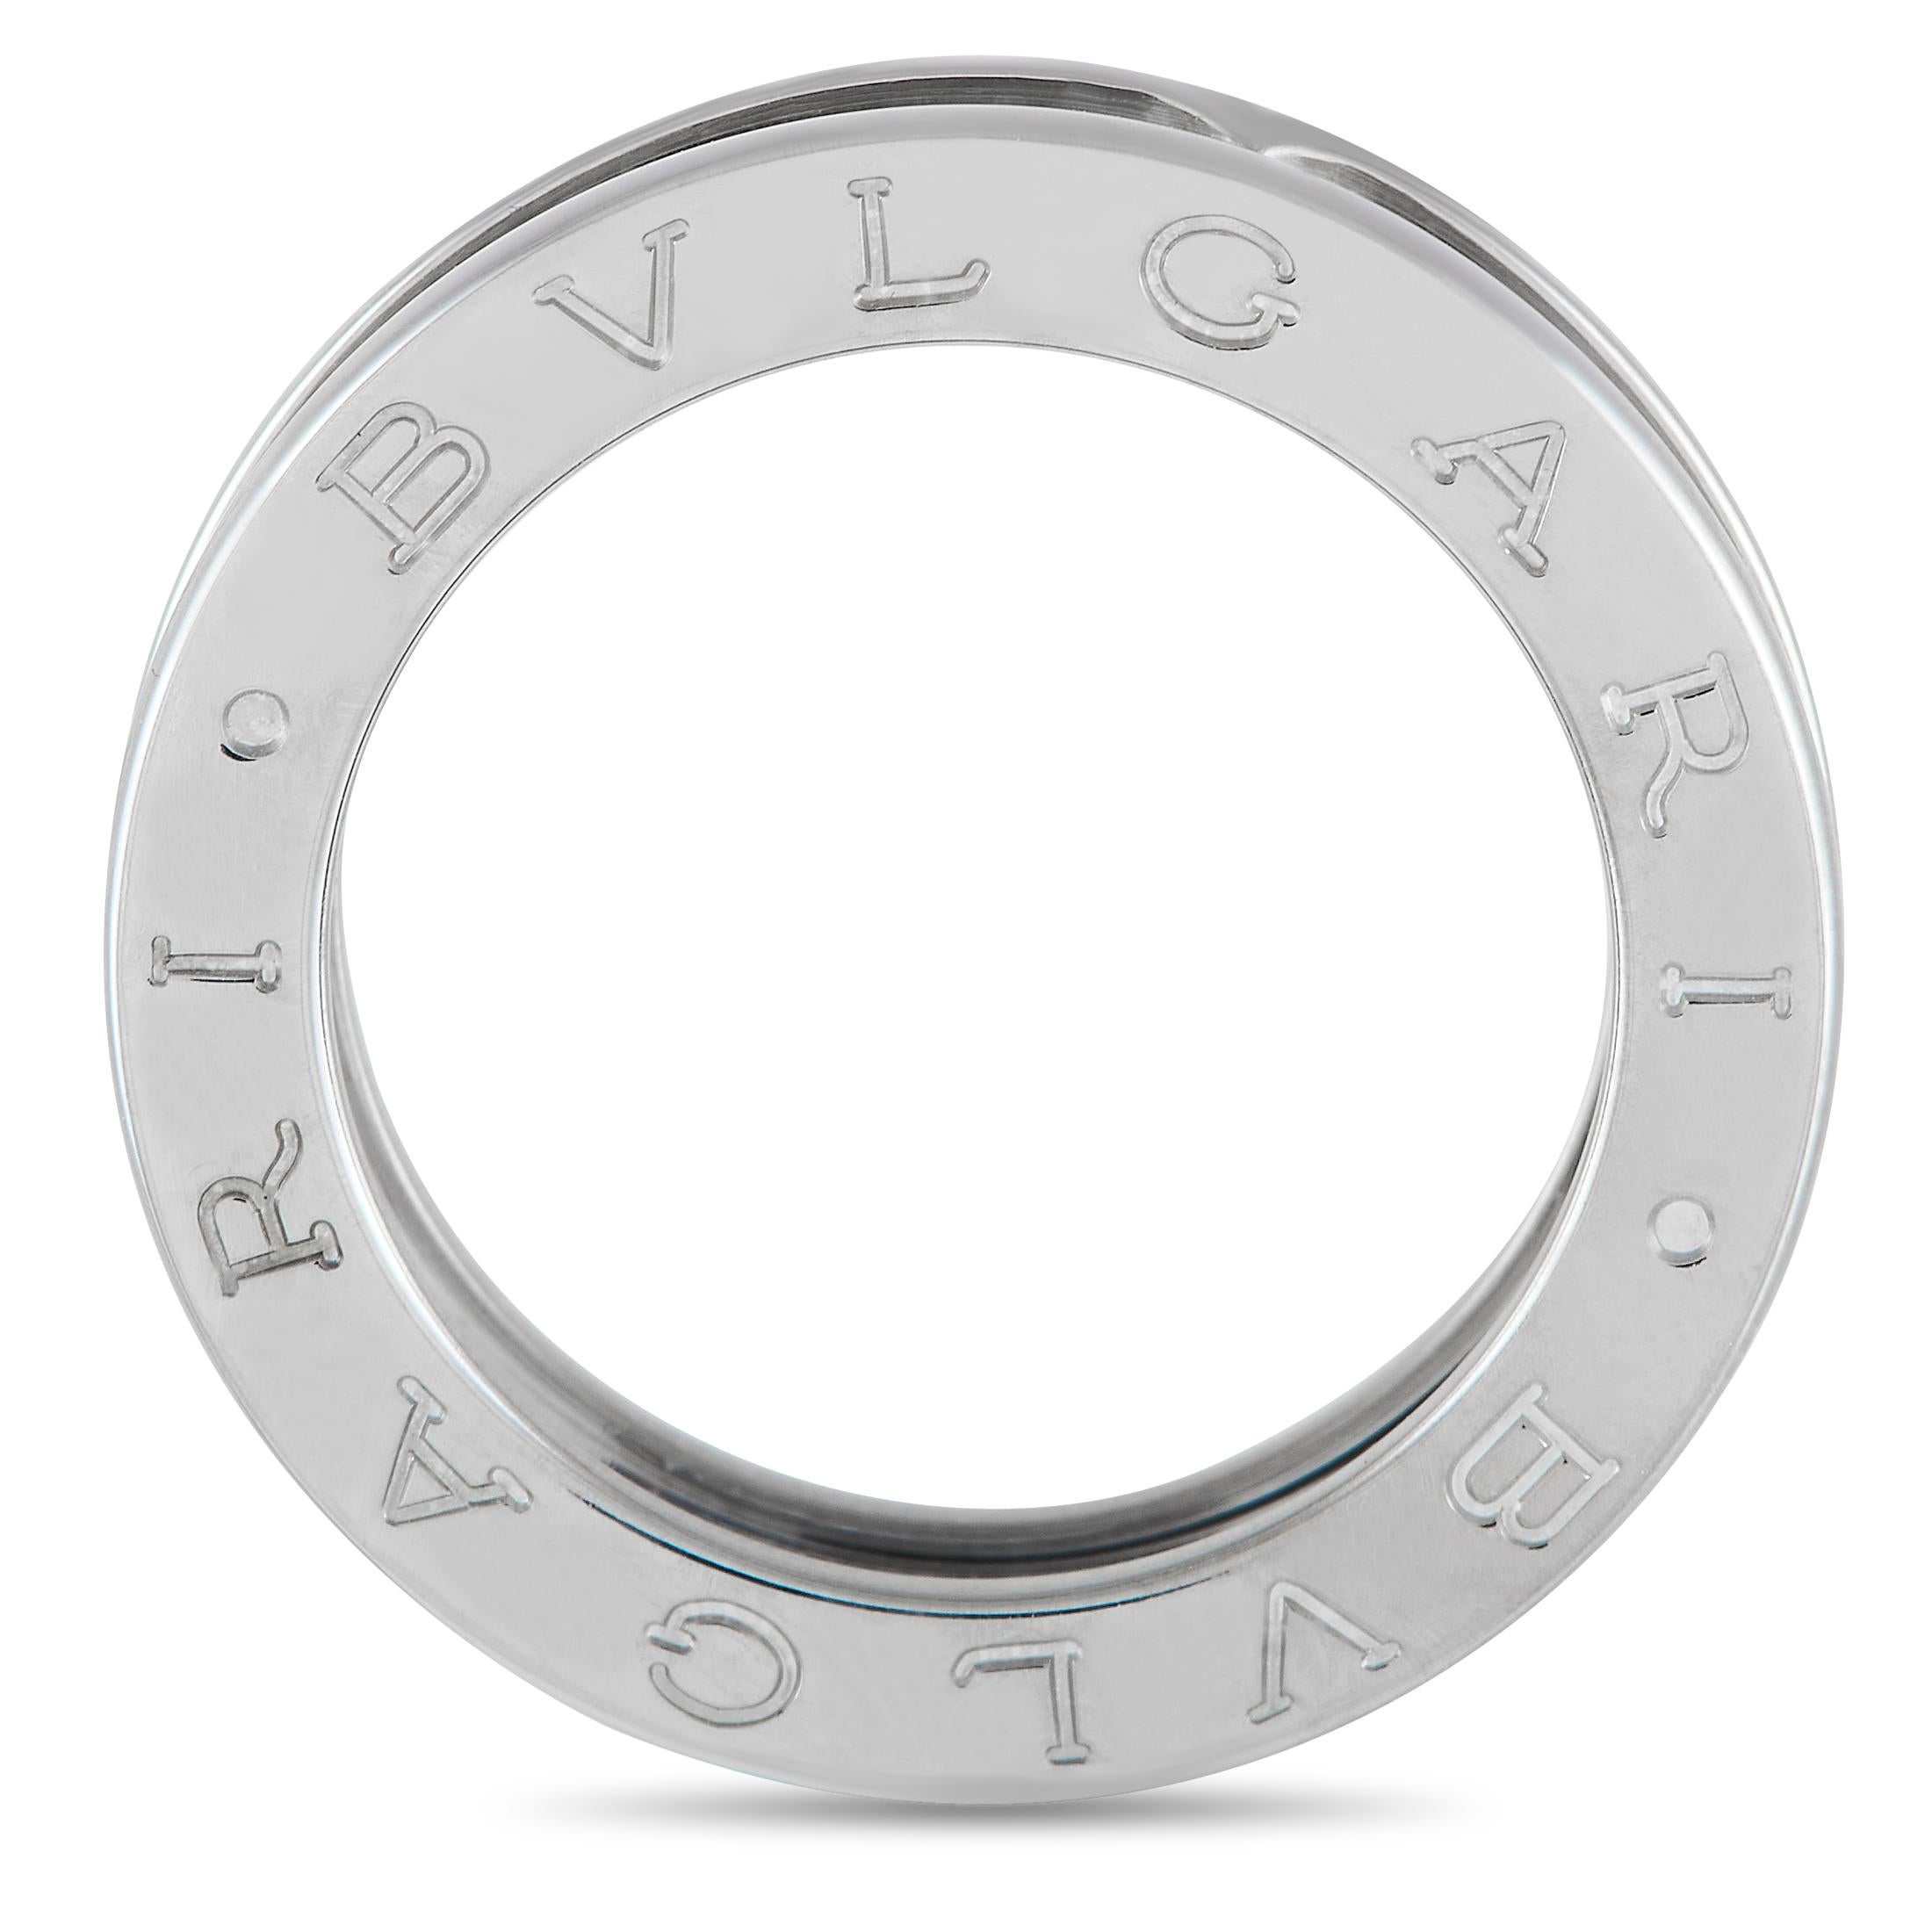 A polished white gold ring with a straightforward yet immediately recognizable design. The Bvlgari B.zero1 One-Band ring is fashioned in 18K white gold and evokes the imposing silhouette of the historic Colosseum in Rome. It bears the double Bvlgari